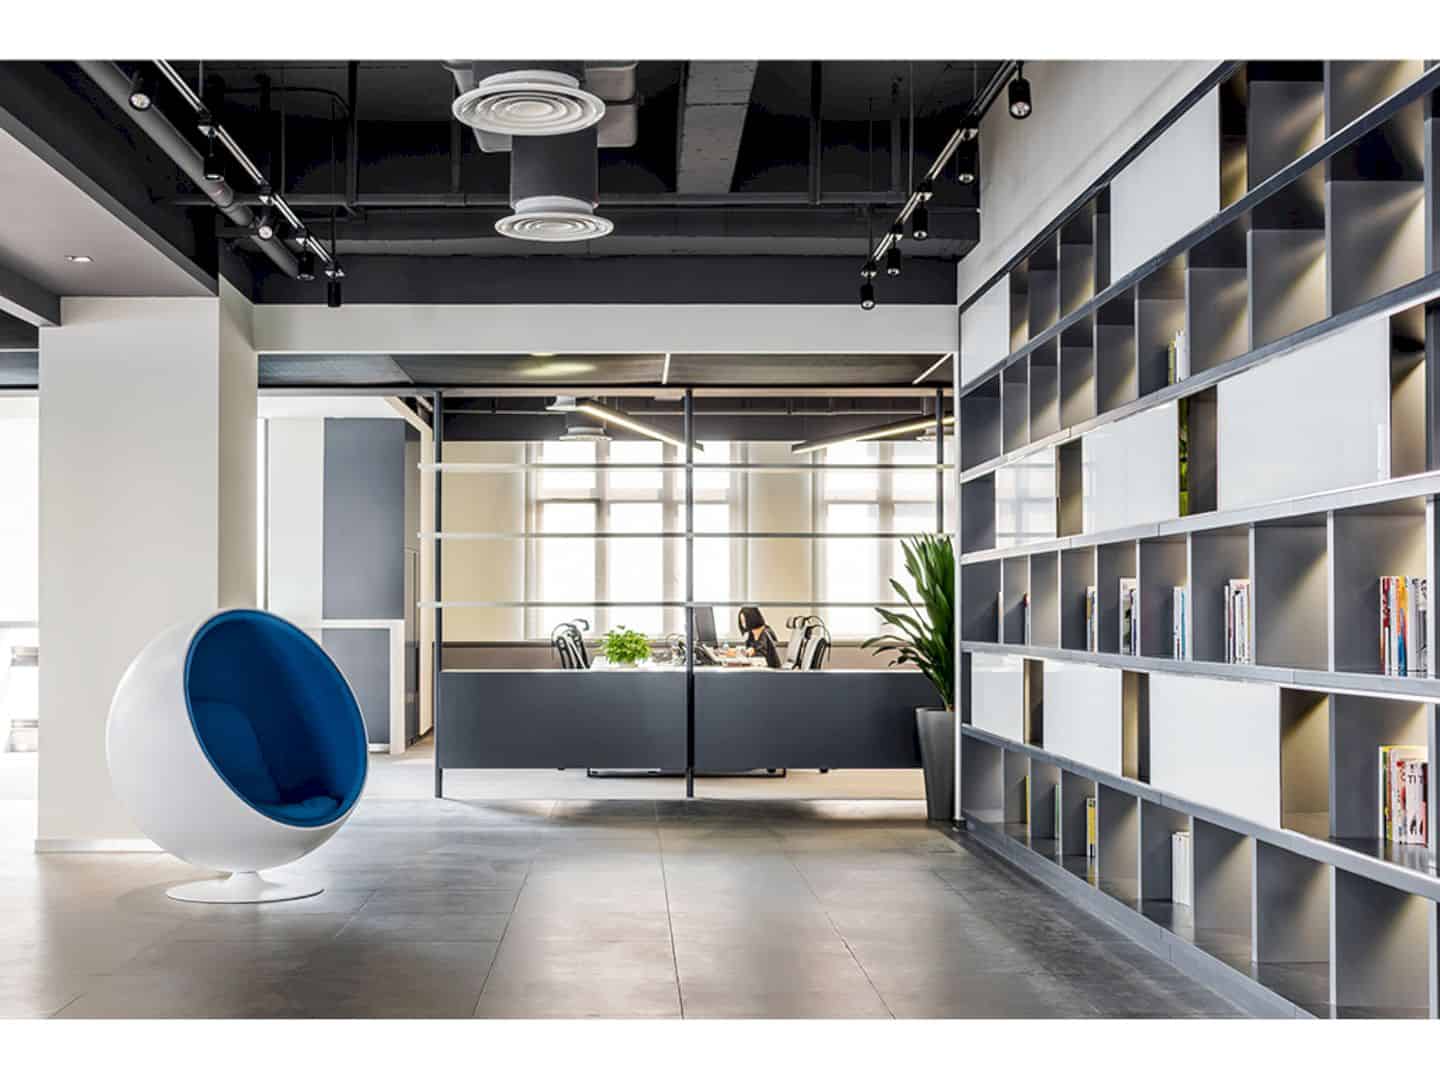 Datayes Office A Cutting Edge Internet Company With Fashionable Design 1